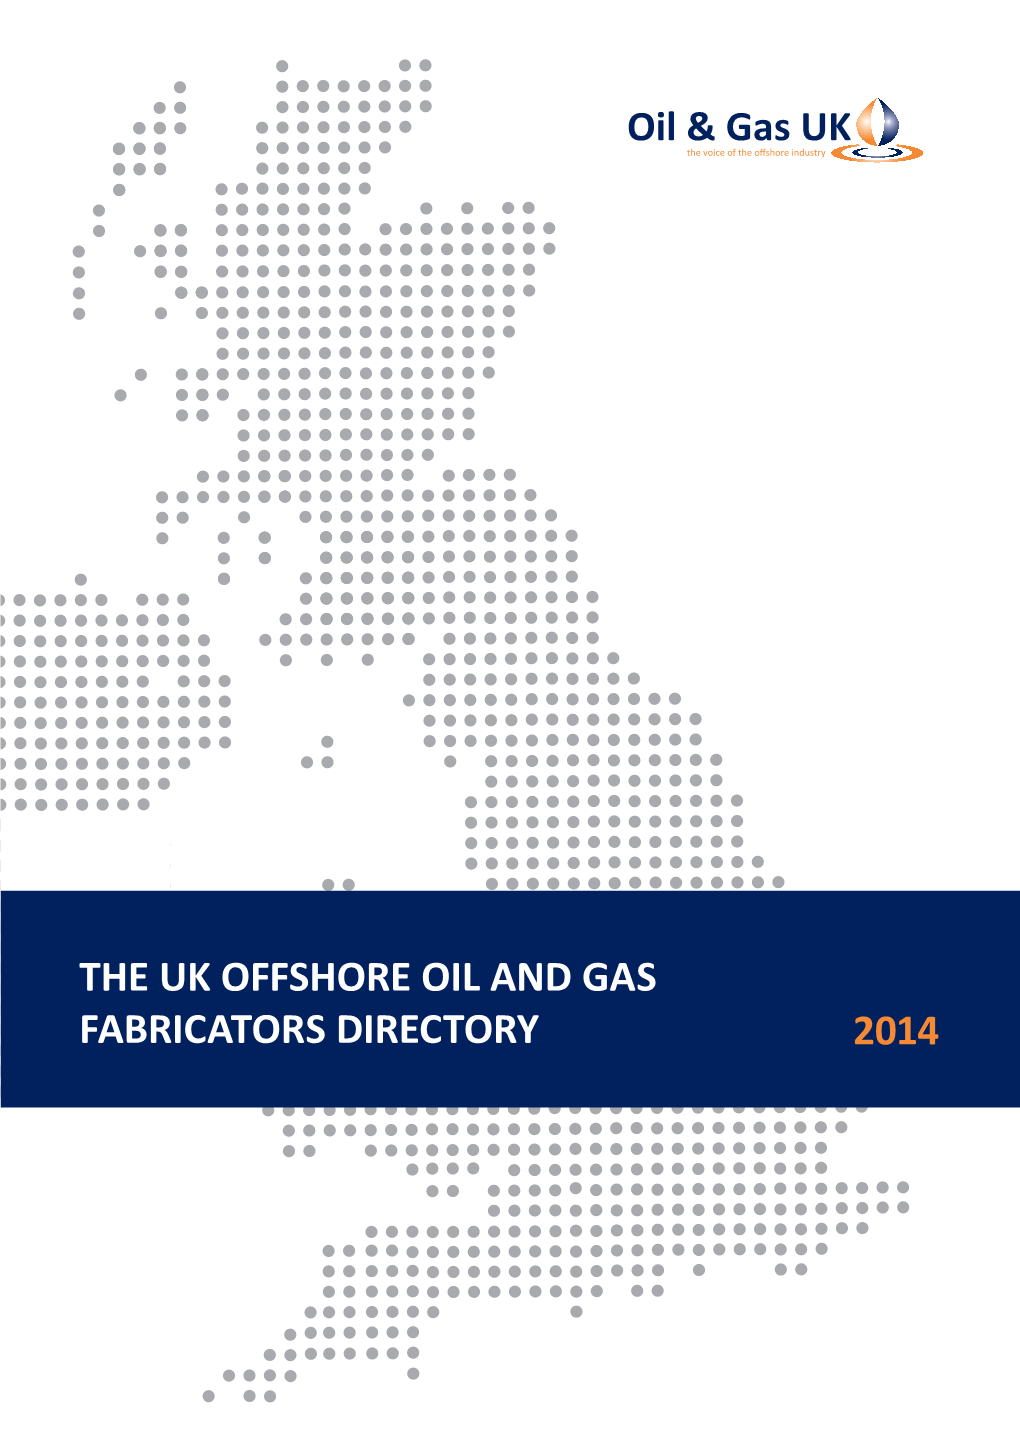 THE UK OFFSHORE OIL and GAS FABRICATORS DIRECTORY 2014 Page 2 the UK OFFSHORE OIL and GAS FABRICATORS DIRECTORY 2014 Contents